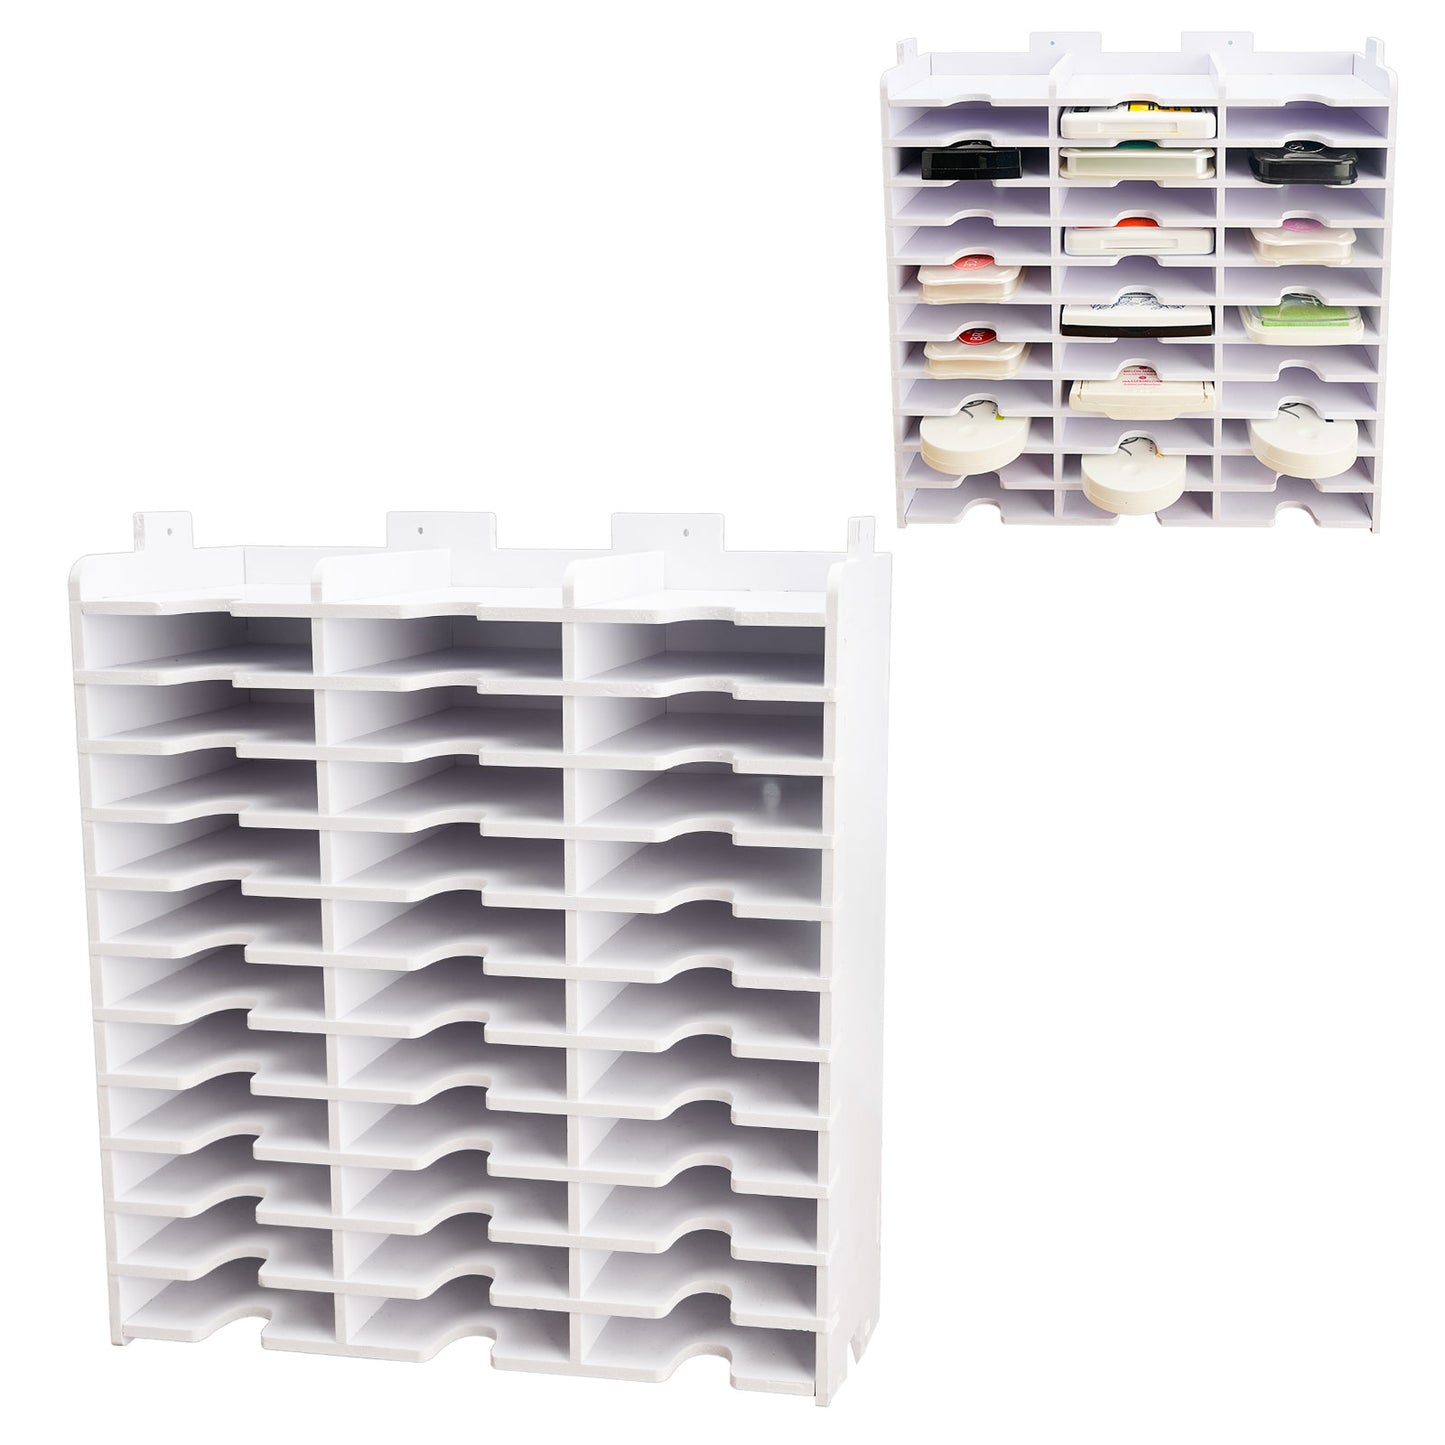  Krafetto Ink Pad Storage Rack, 36 Grids Stamp Pad Organizer  Holder Compatible with Stampin Up, Ranger Ink Pads : Office Products